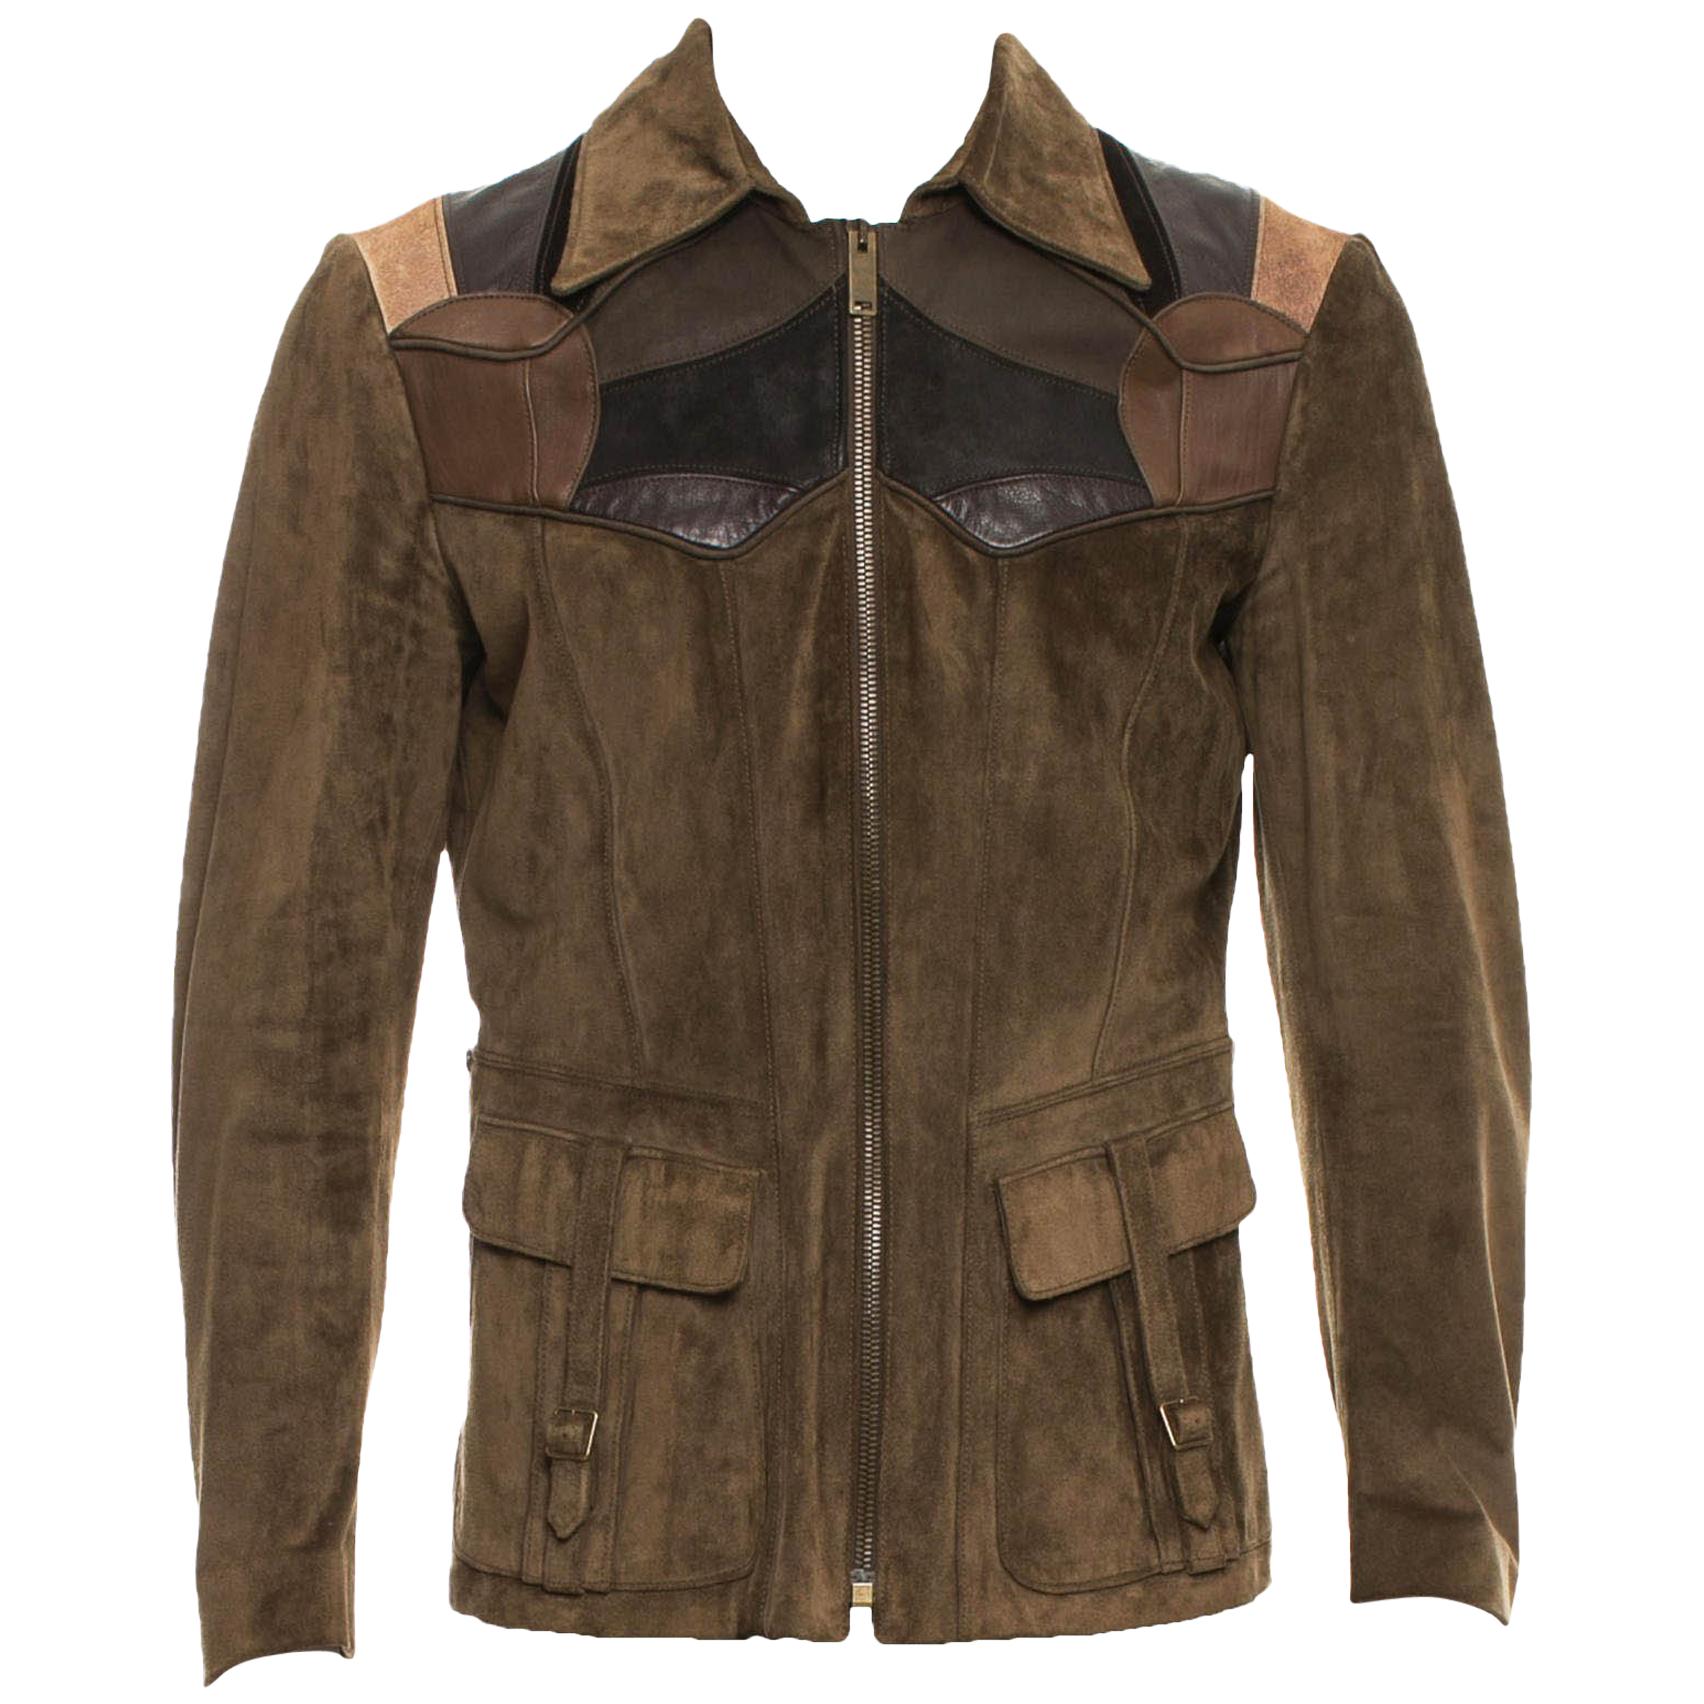 Tom Ford for Gucci Men's Runway Leather Western Jacket, S / S 2004 